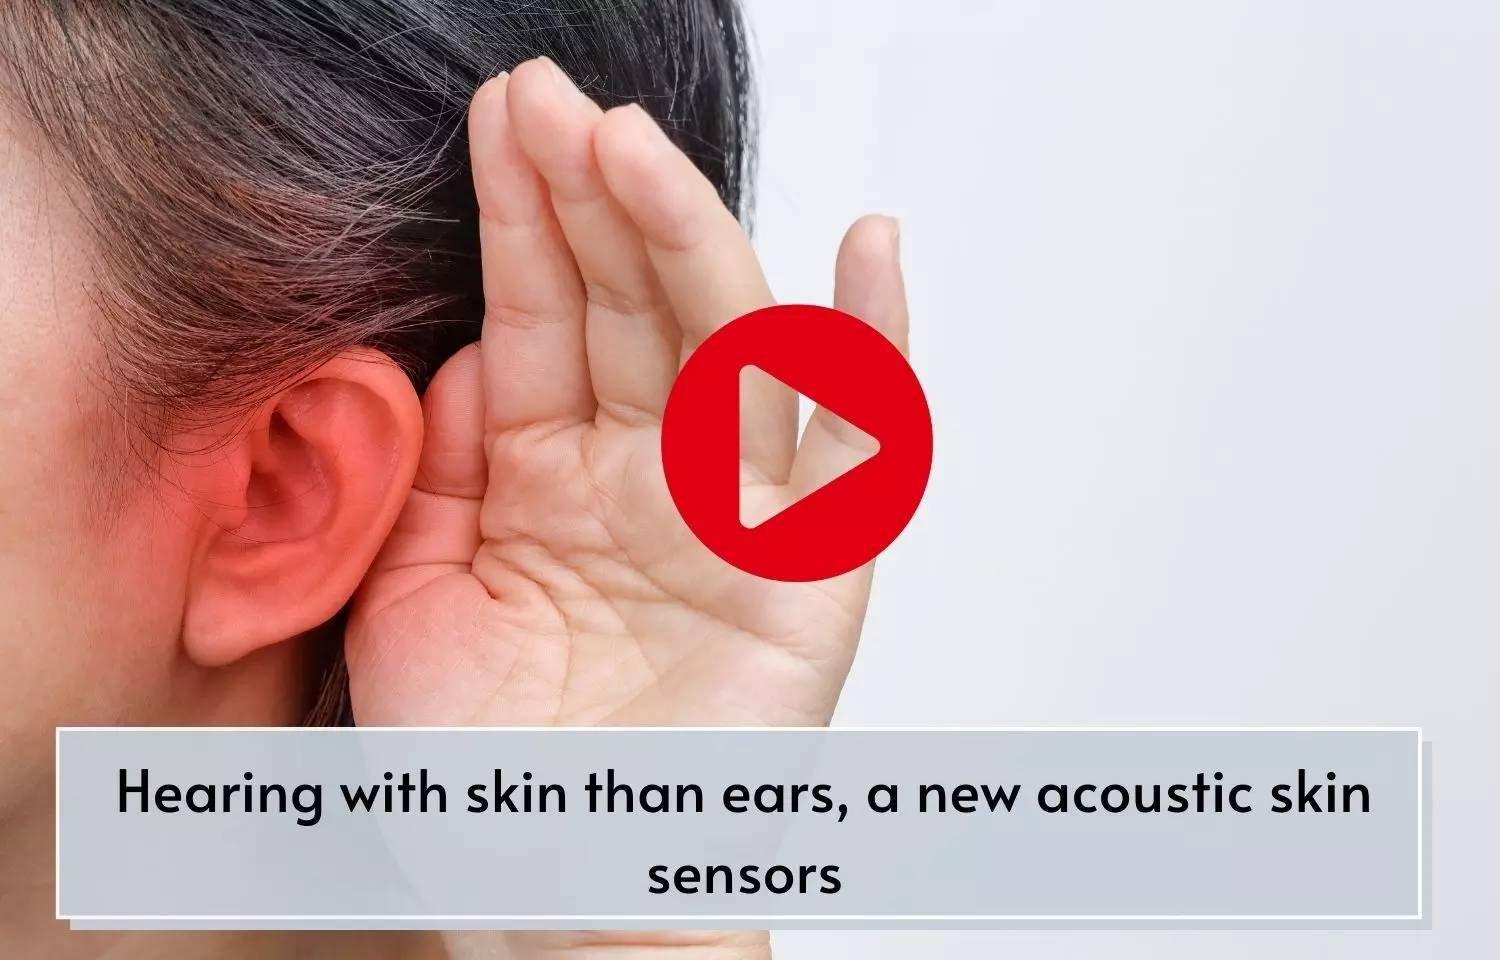 Hearing with skin than ears, a new acoustic skin sensors